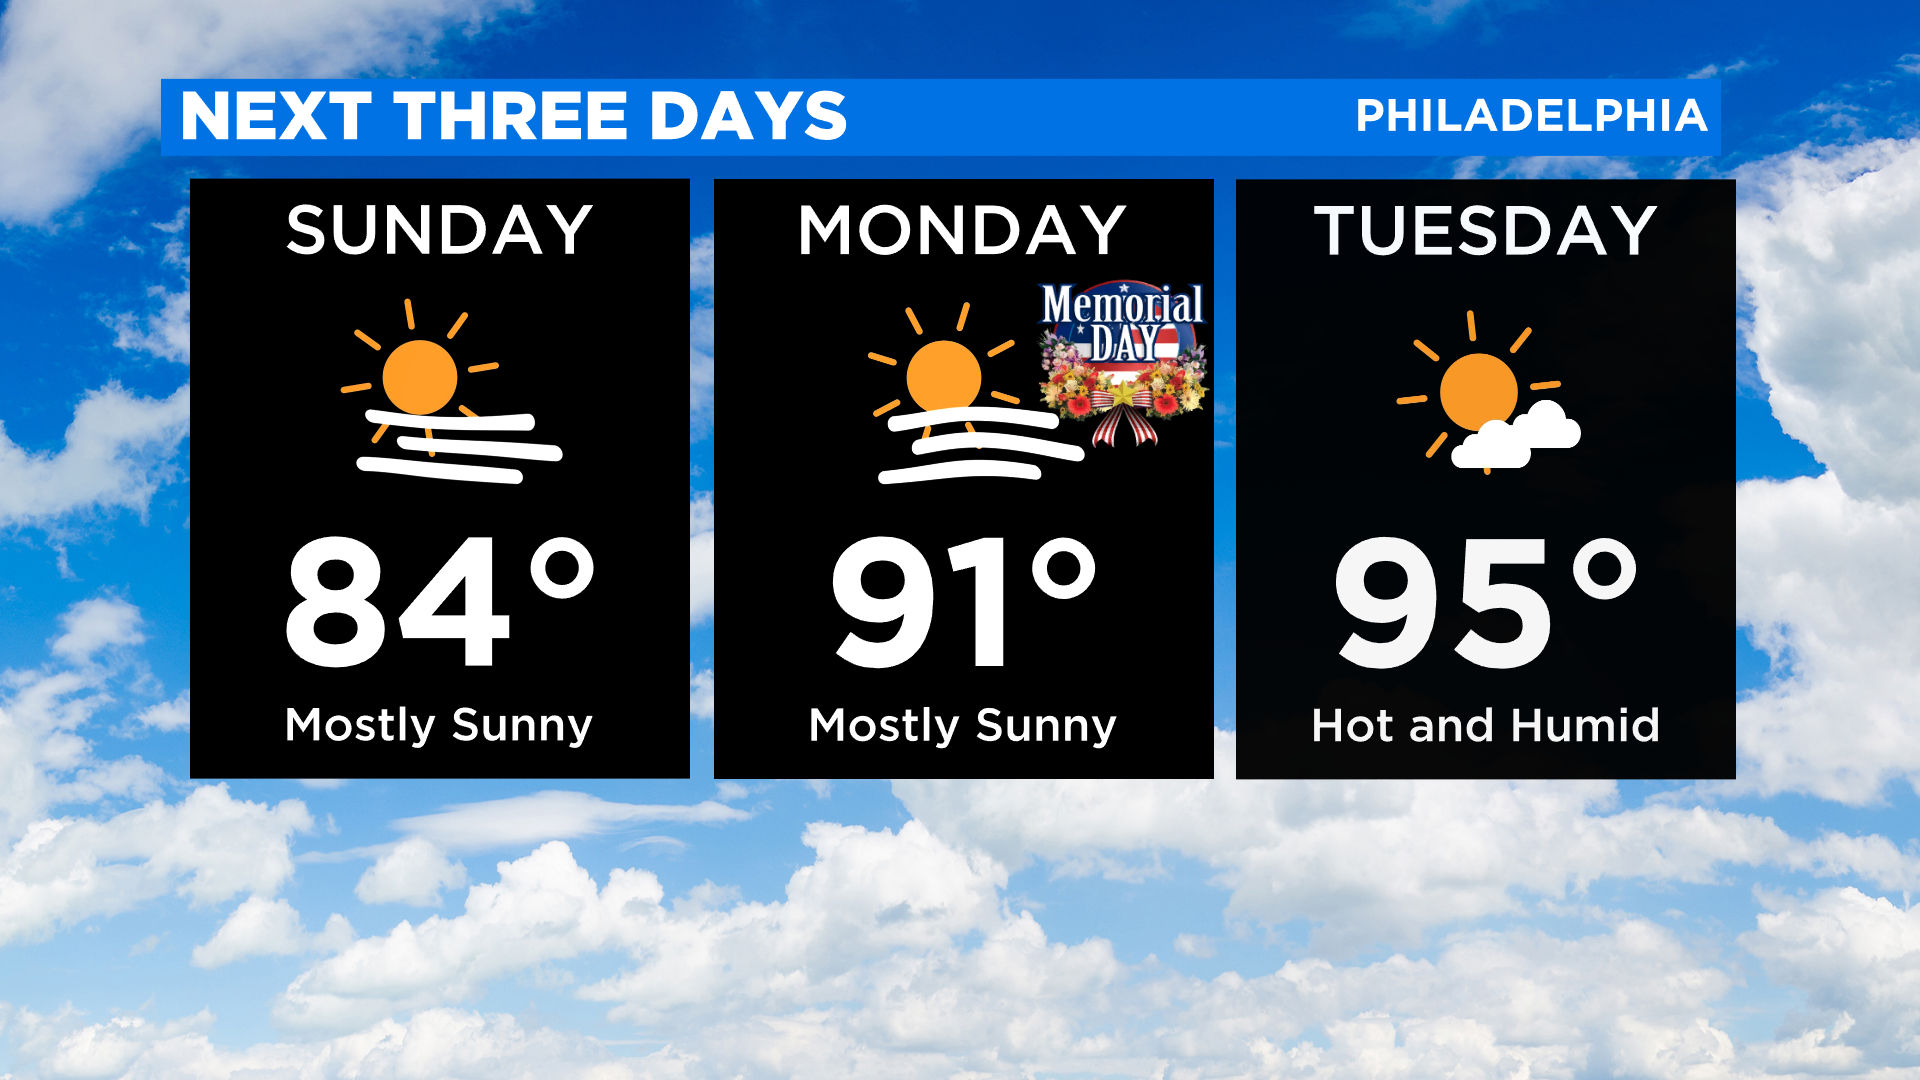 90’s Arrive For Memorial Day – CBS Philly